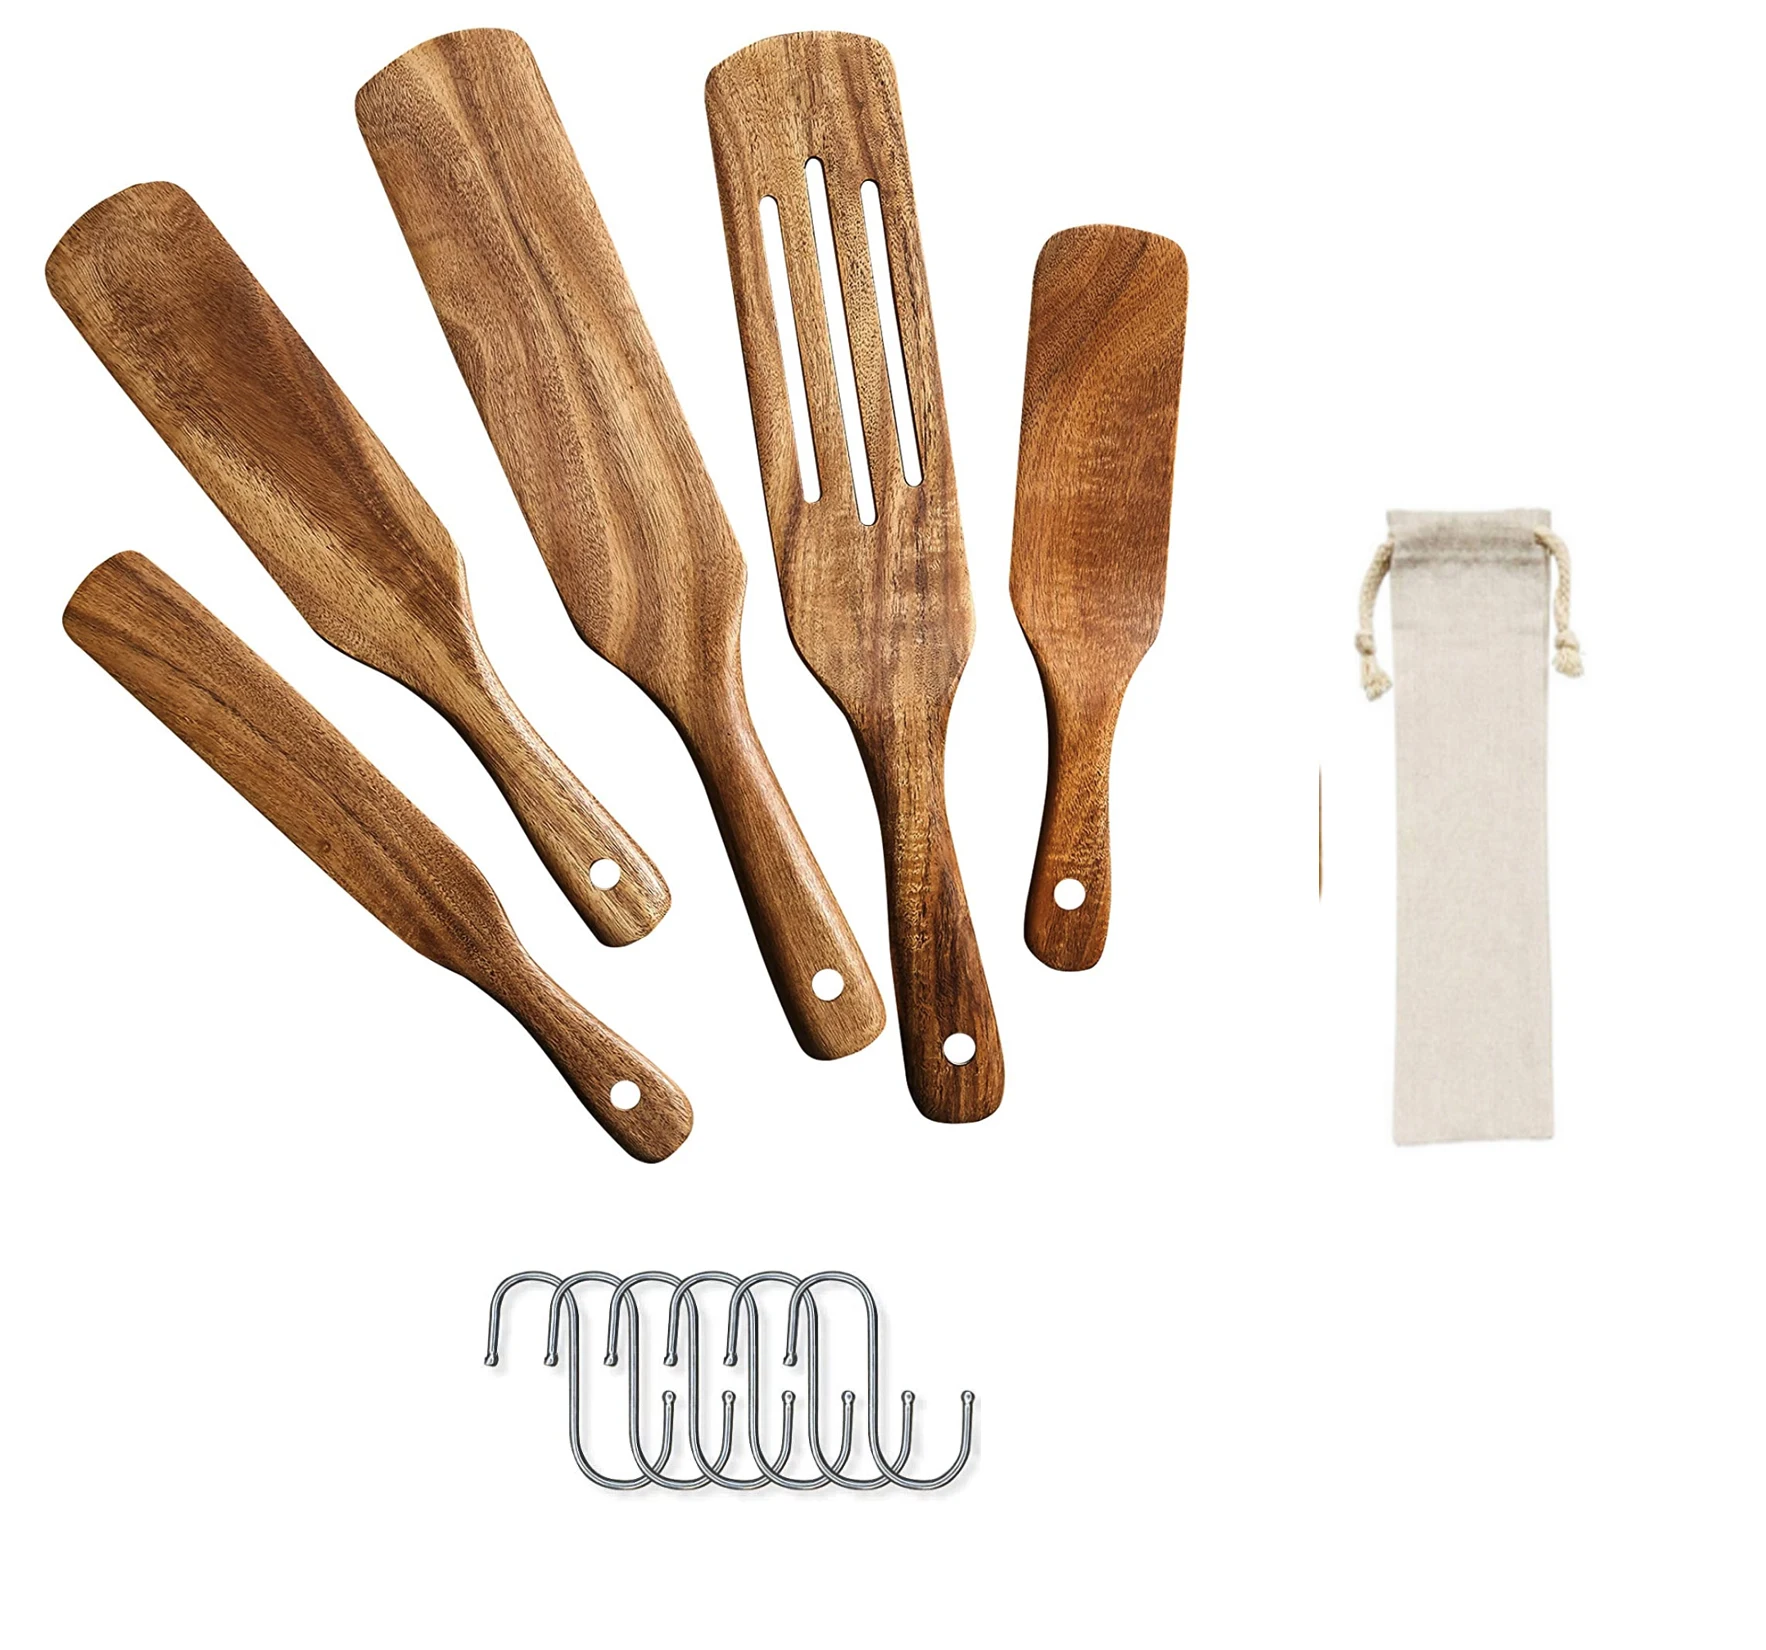 Wooden Spurtles Set of 4, Non-Stick Utensils Tools Durable Natural Wood Slotted Stirring Spatula Kitchen Cookware For Cooking